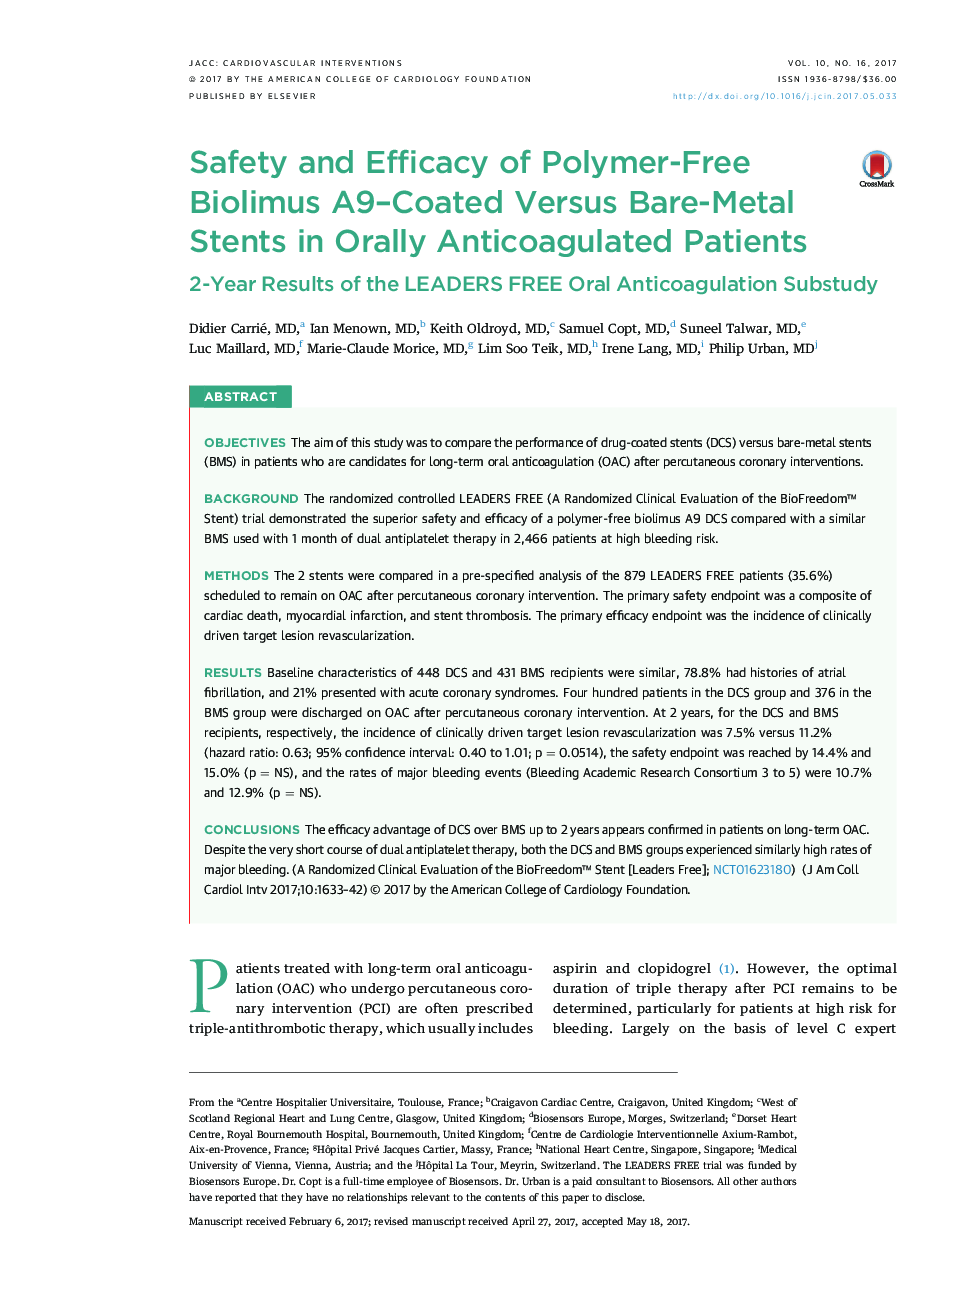 Safety and Efficacy of Polymer-Free Biolimus A9-Coated Versus Bare-Metal Stents in Orally Anticoagulated Patients